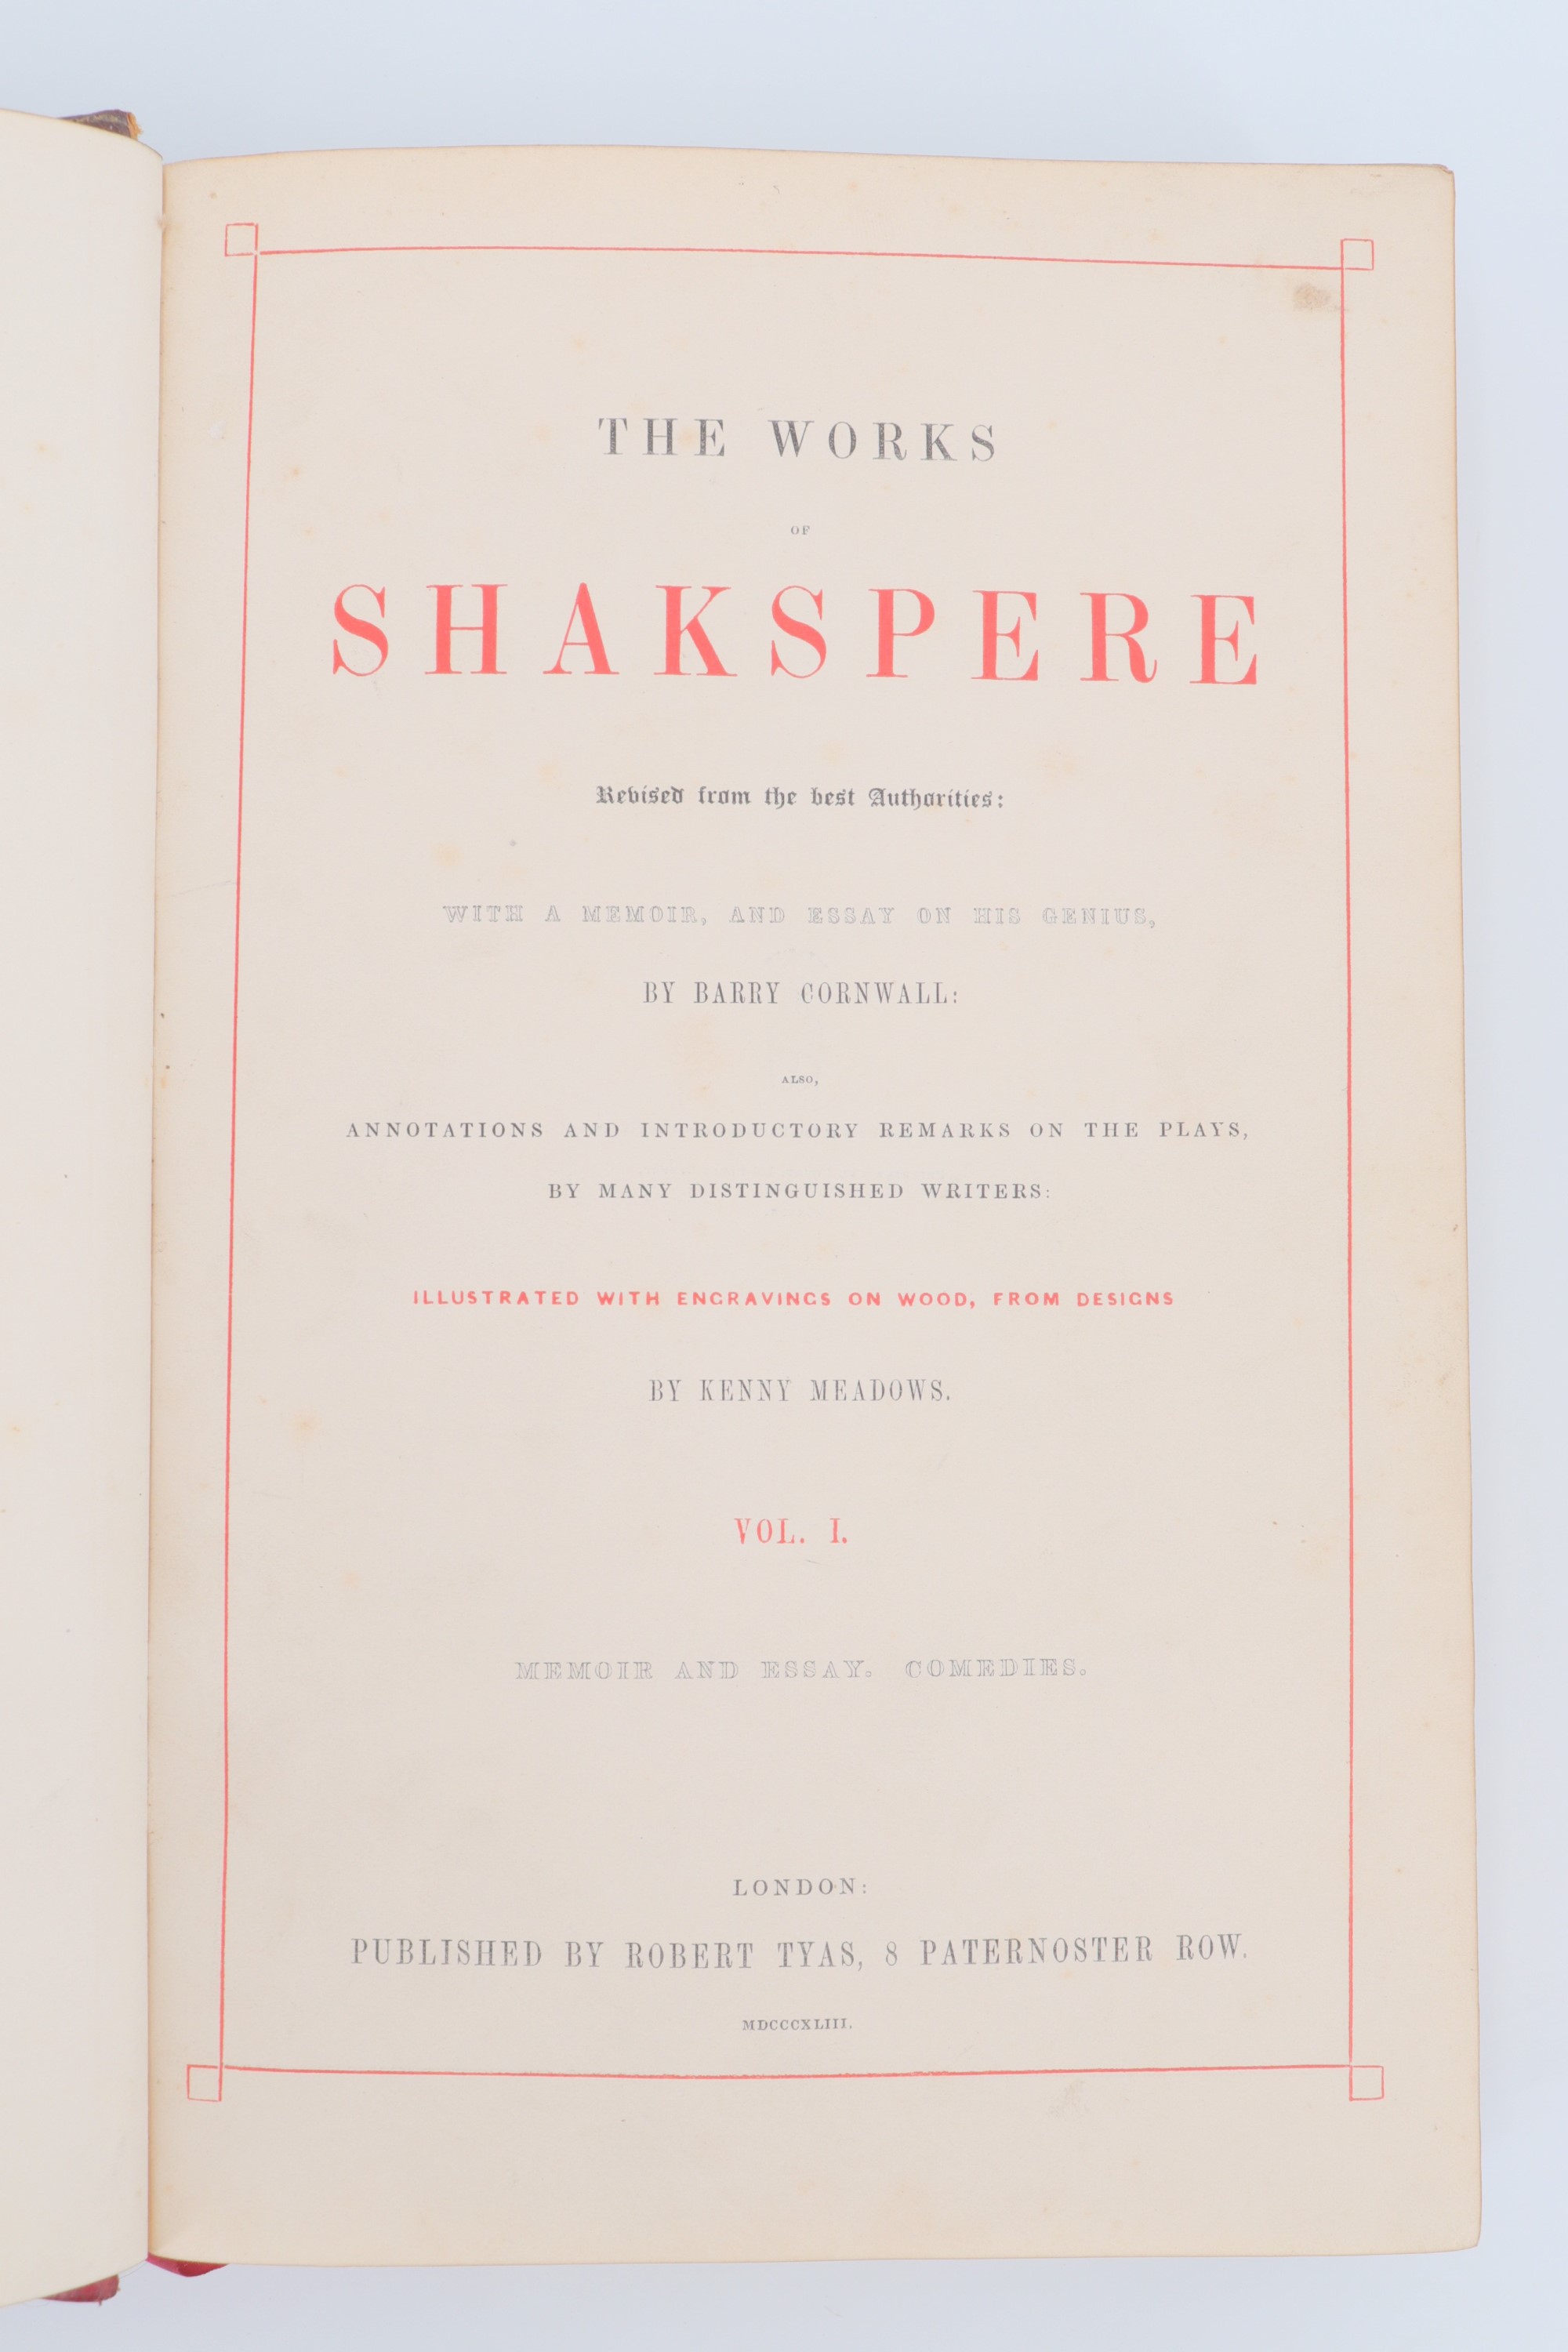 The Works of Shakespeare, revised from the best authorities: with a memoir, and essay on his genius, - Image 3 of 3